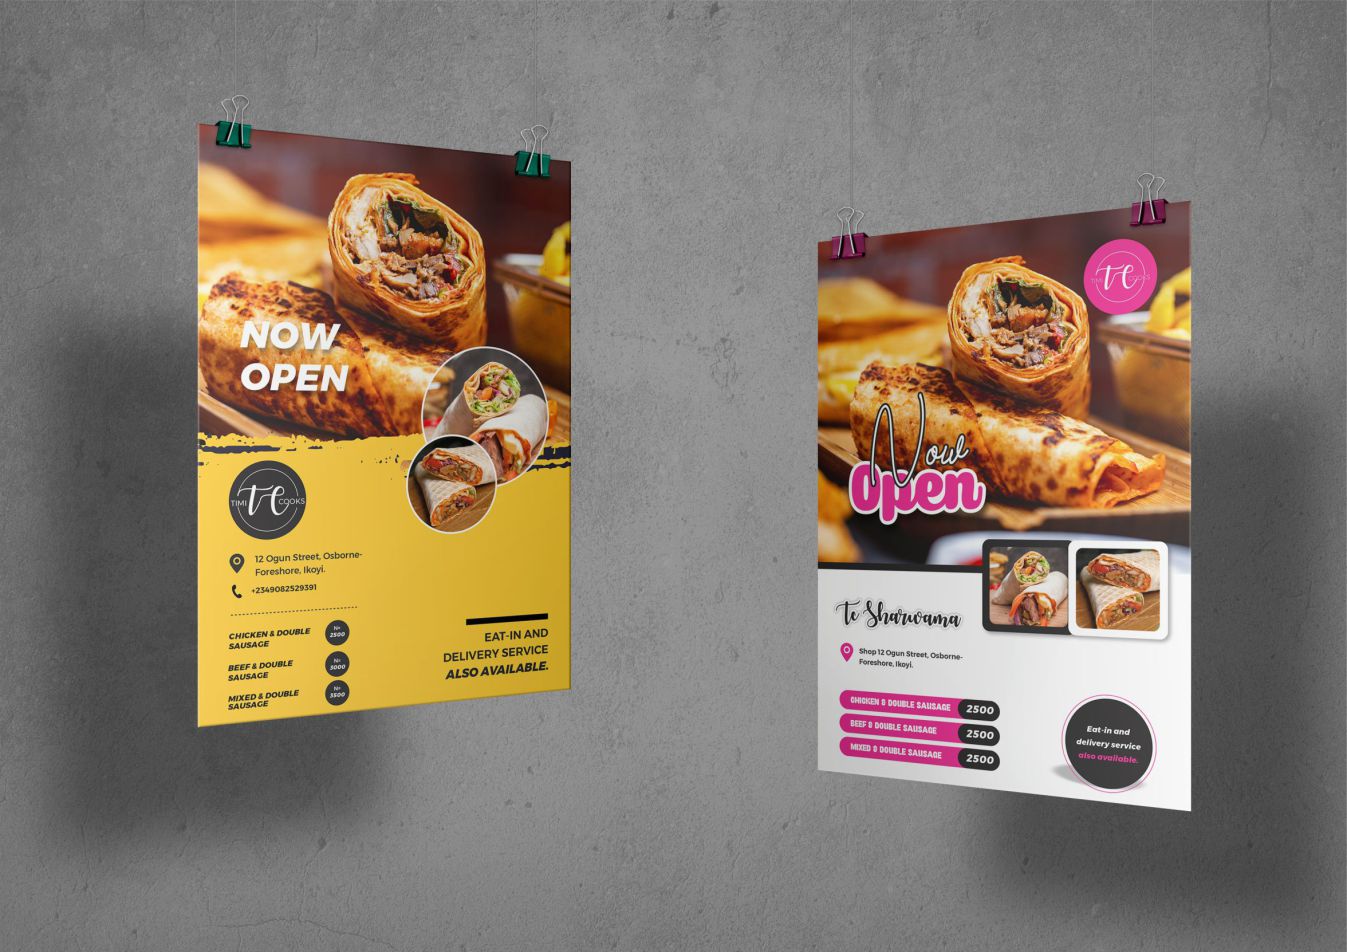 creative product poster design